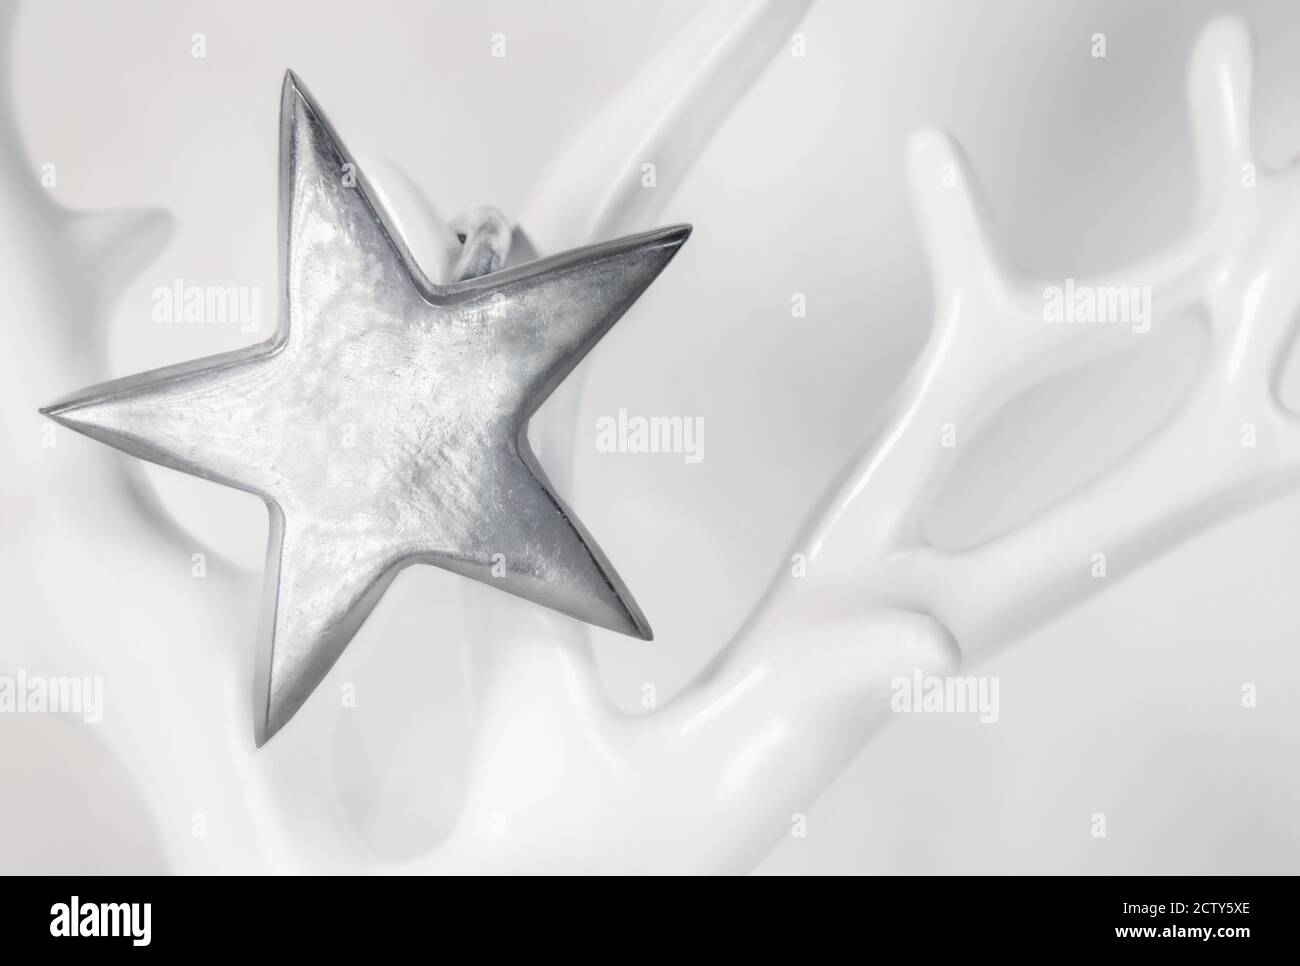 Single silver star on soft white background. Close up. The sterling silver star hangs on a porcelain tree or antler. Stock Photo